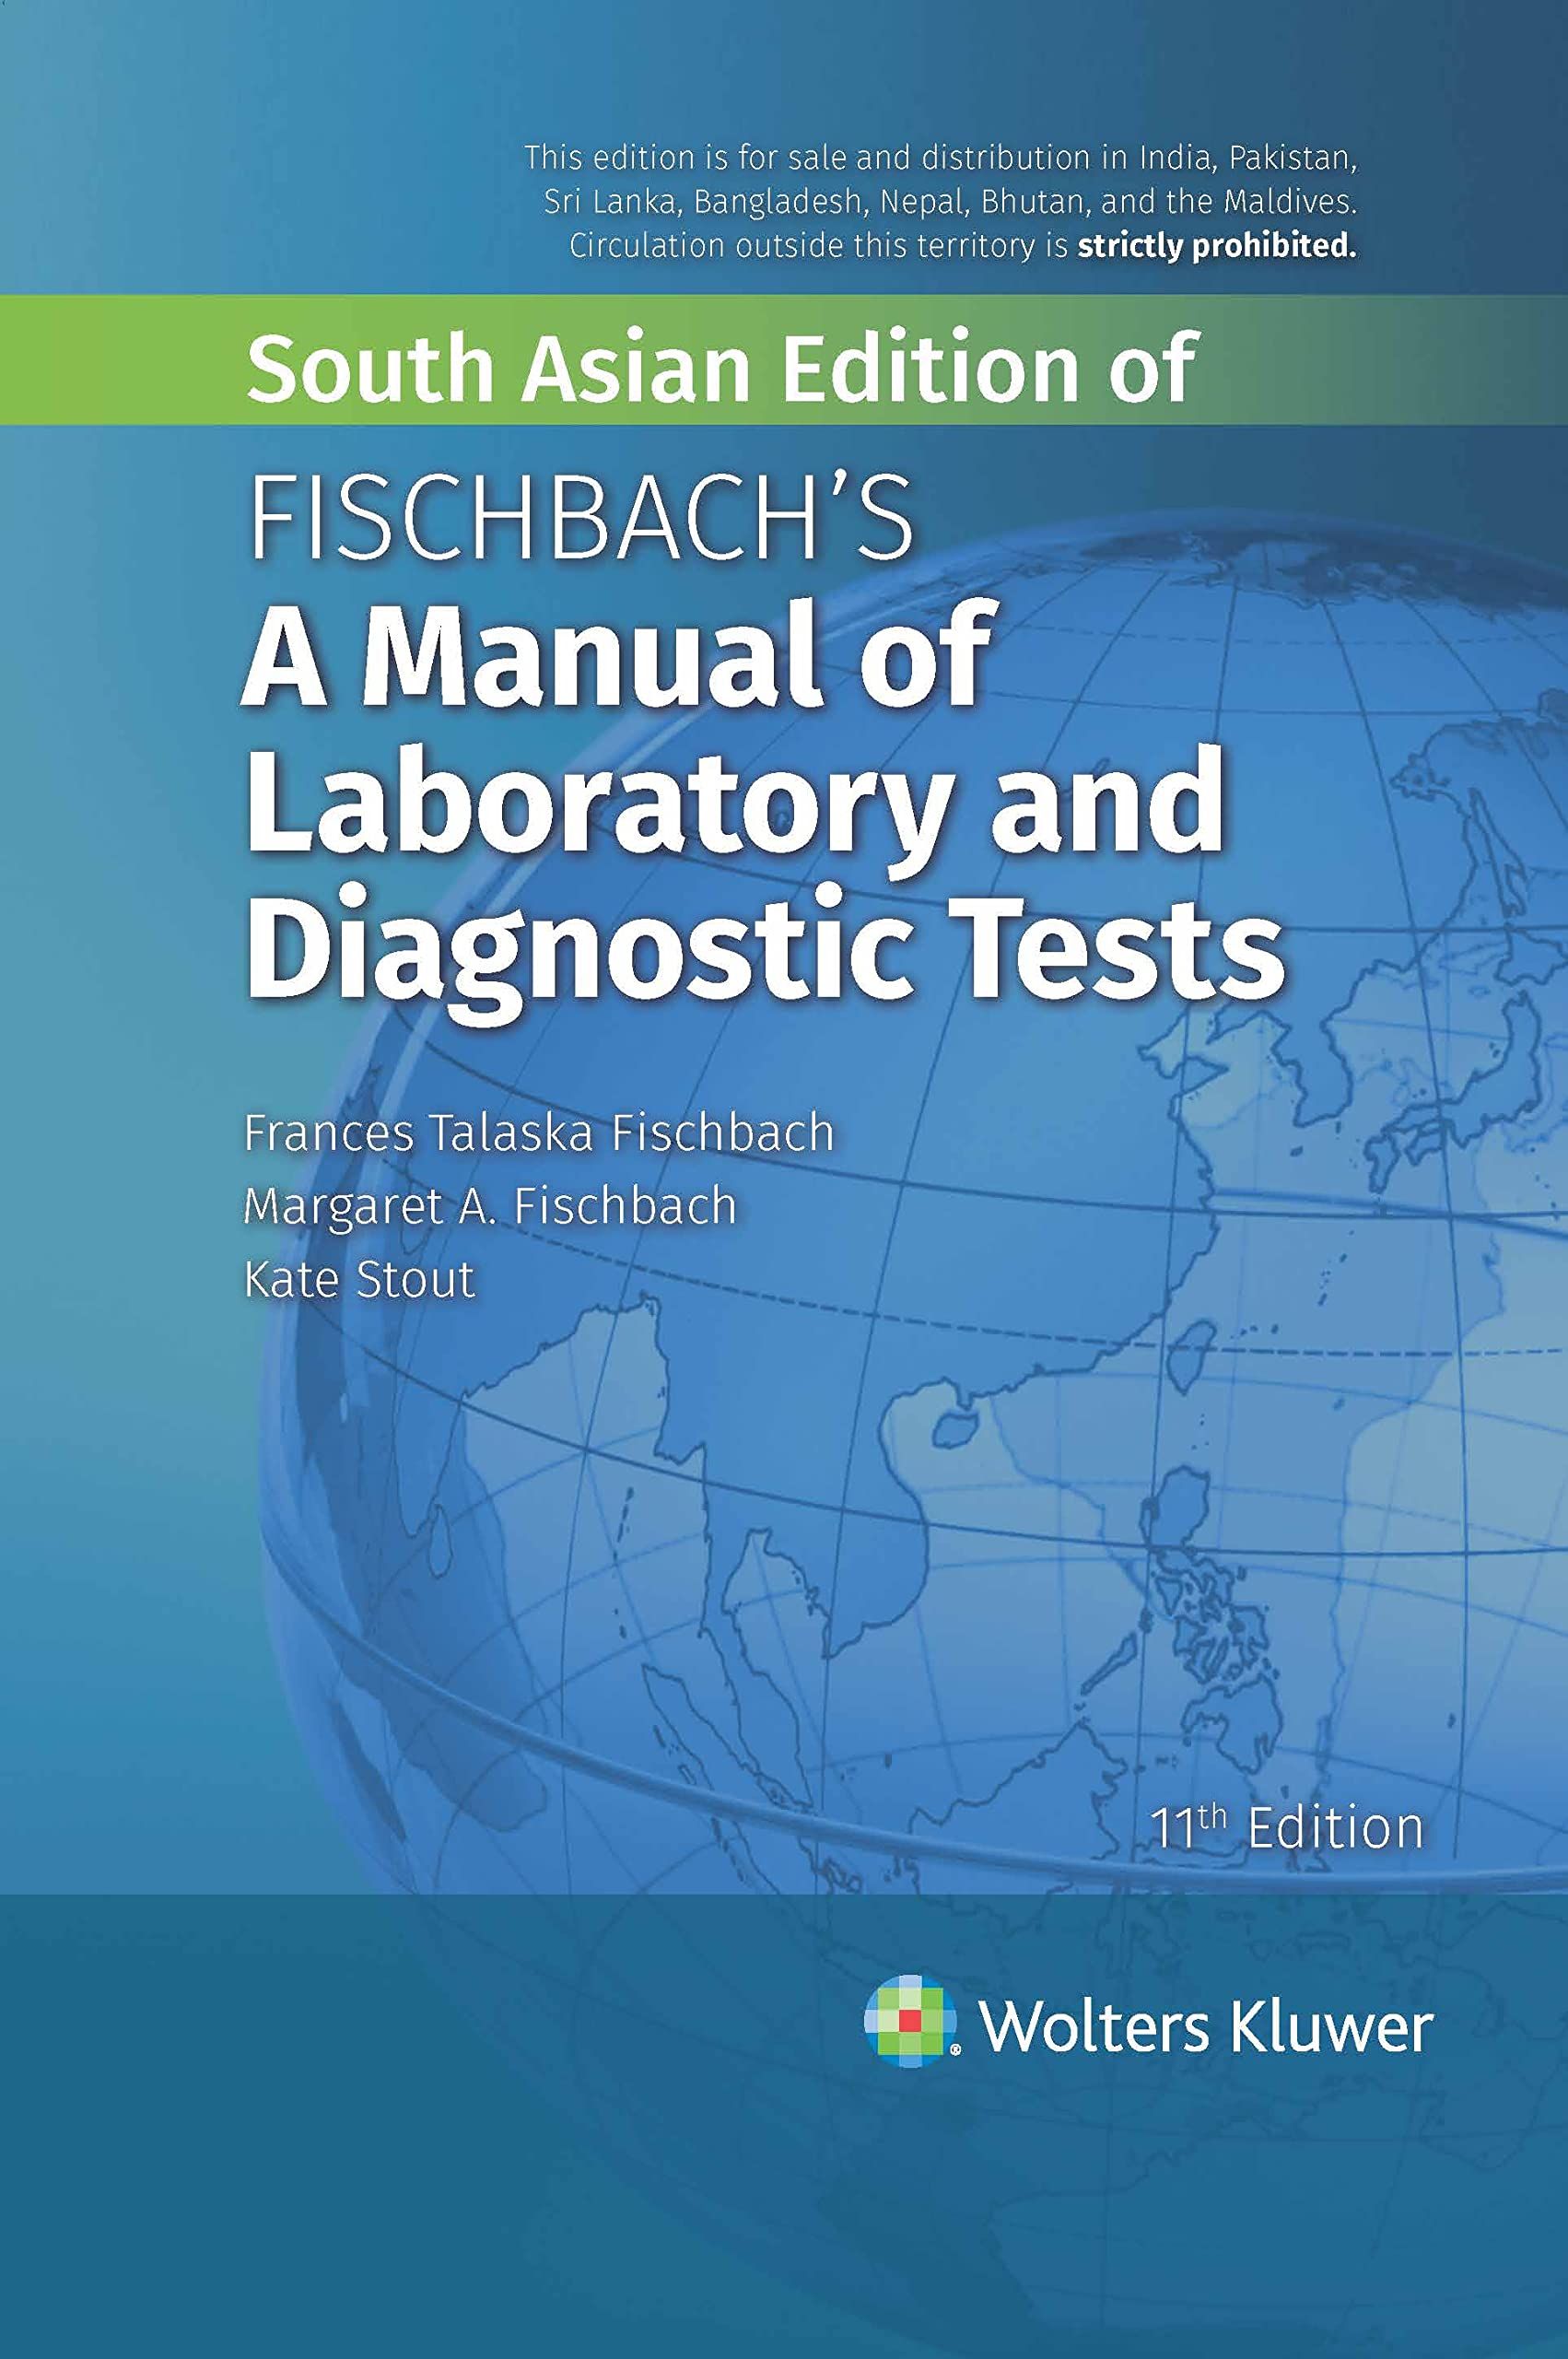 

general-books/general/fischbach-s-a-manual-of-laboratory-and-diagnostic-tests-11-ed--9789390612123